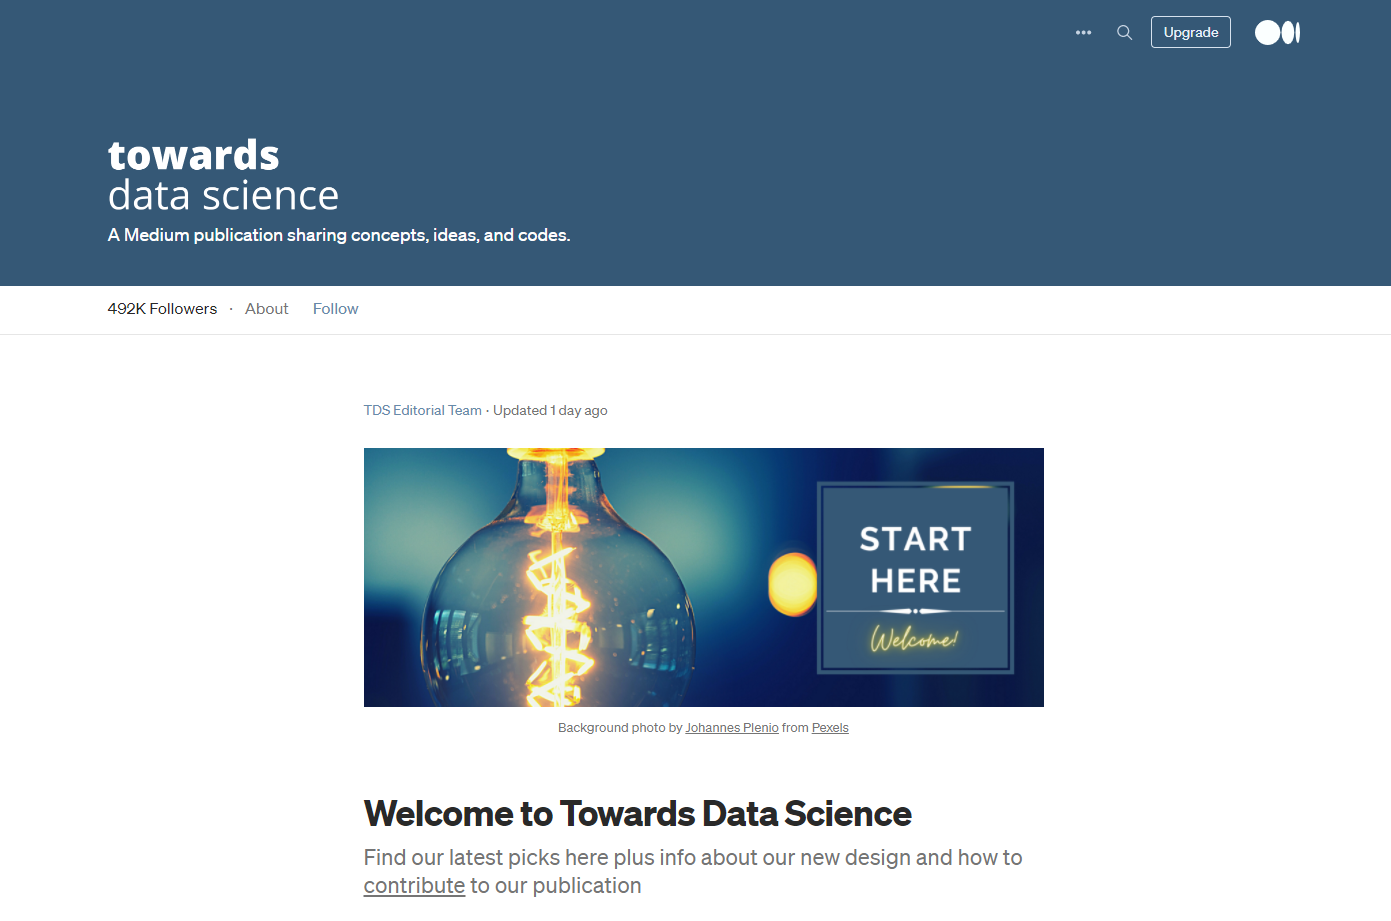 online resources and data science interview tips